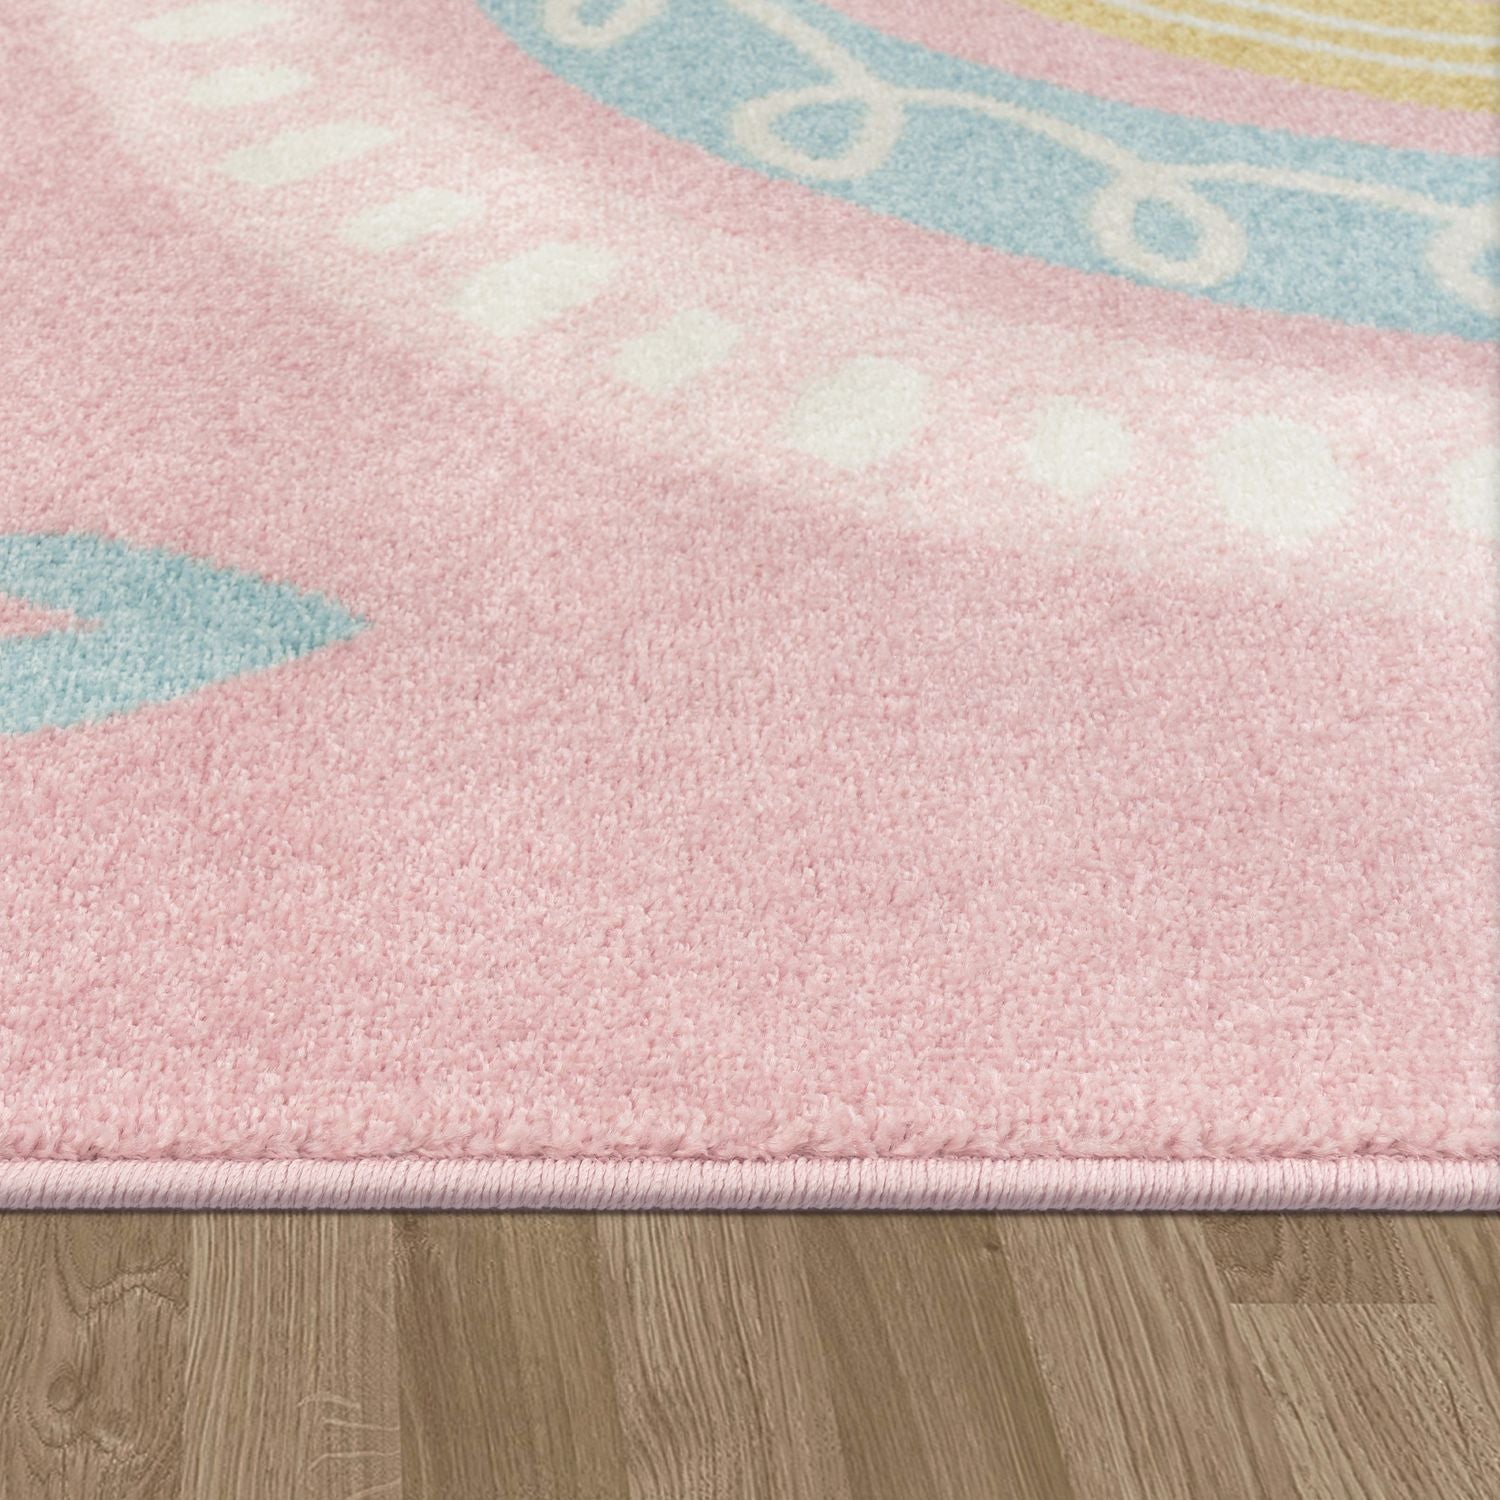  Paco Home Kids Room Rug with Rainbow and Hearts in Beige Brown,  Size: 5'3 x 7'3 : Home & Kitchen